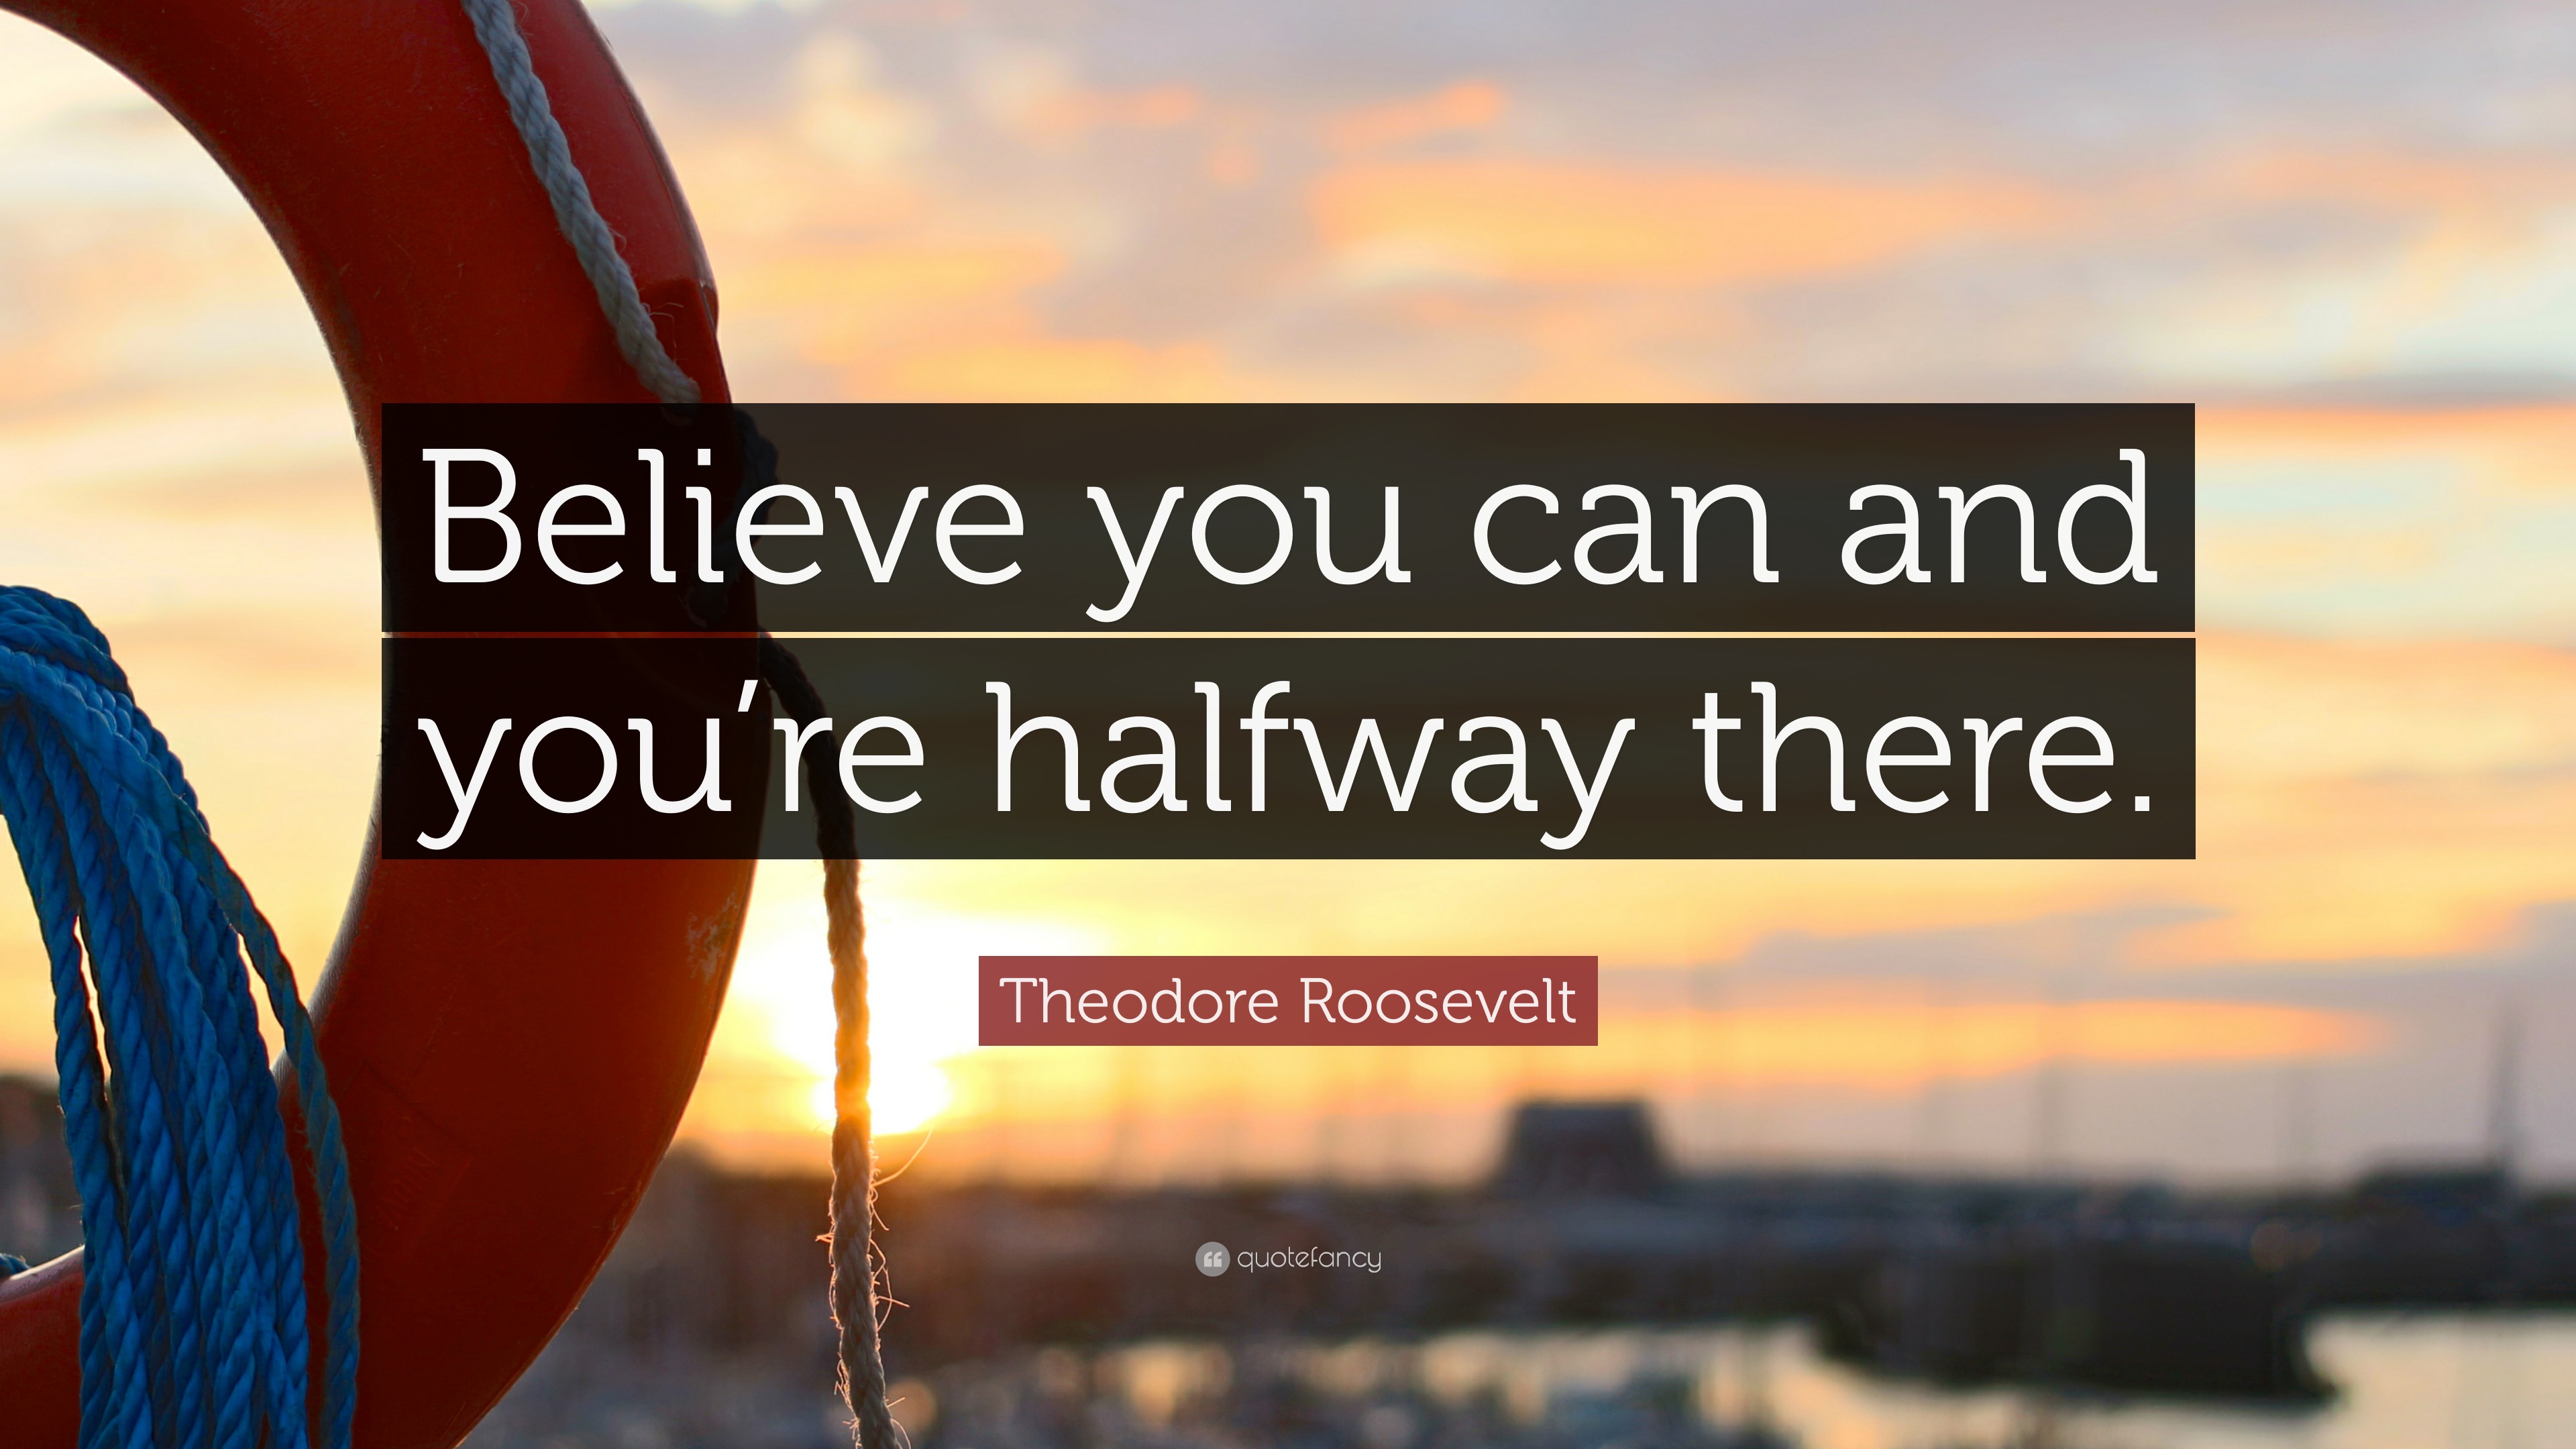 Theodore Roosevelt Quote: “Believe you can and you’re halfway there.”